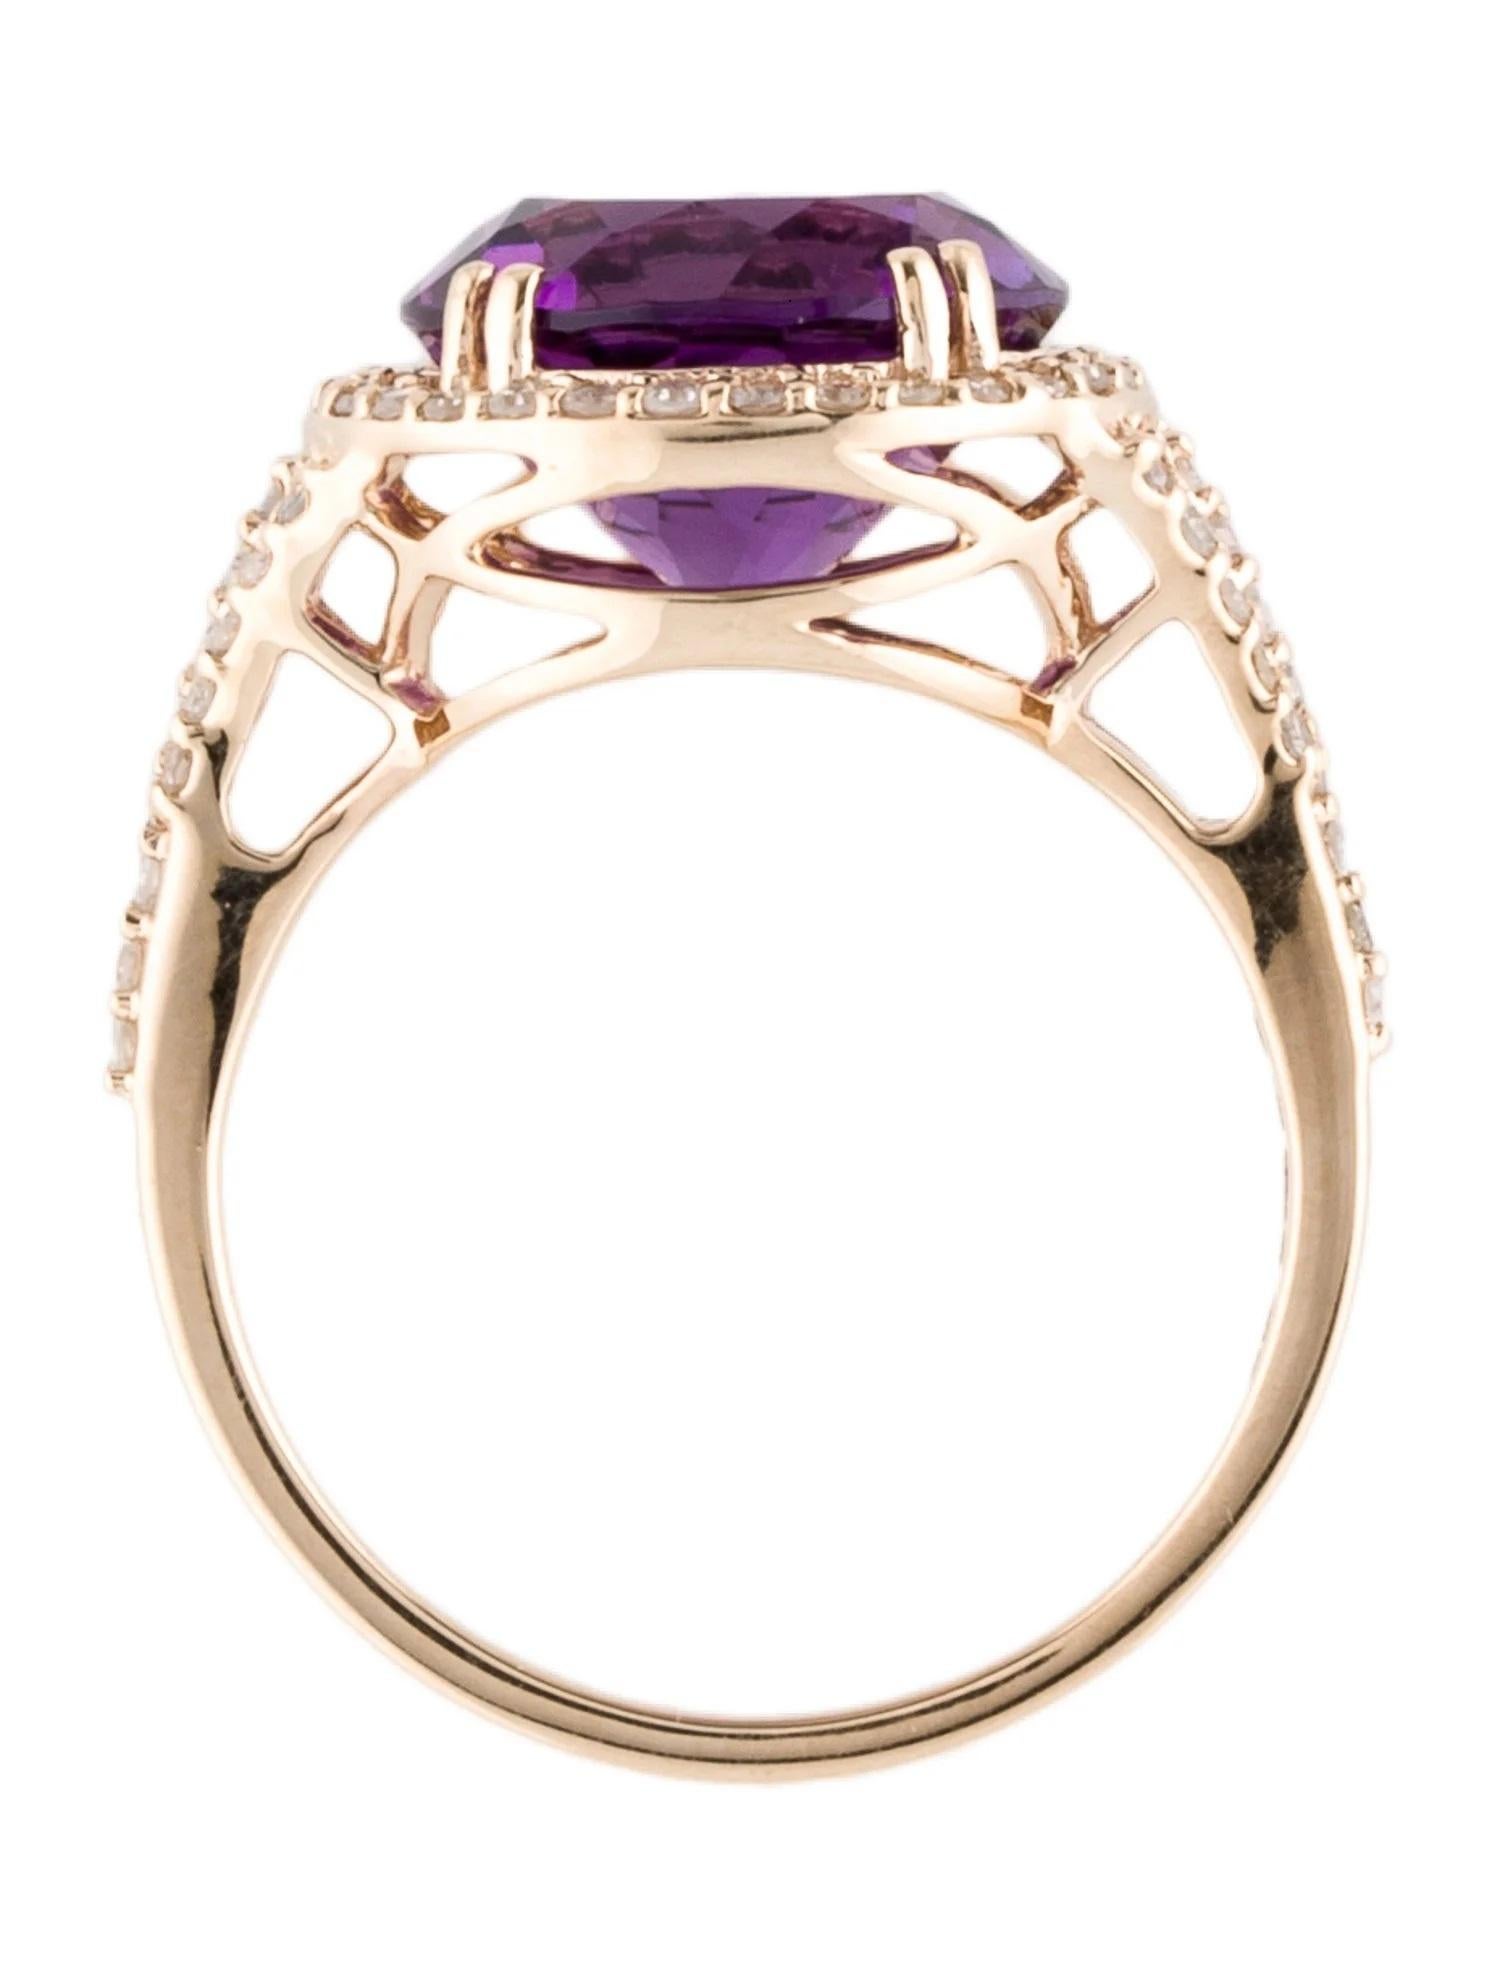 14K 4.45ctw Amethyst & Diamond Cocktail Ring Size 6.75  Round Modified Brillian In New Condition For Sale In Holtsville, NY